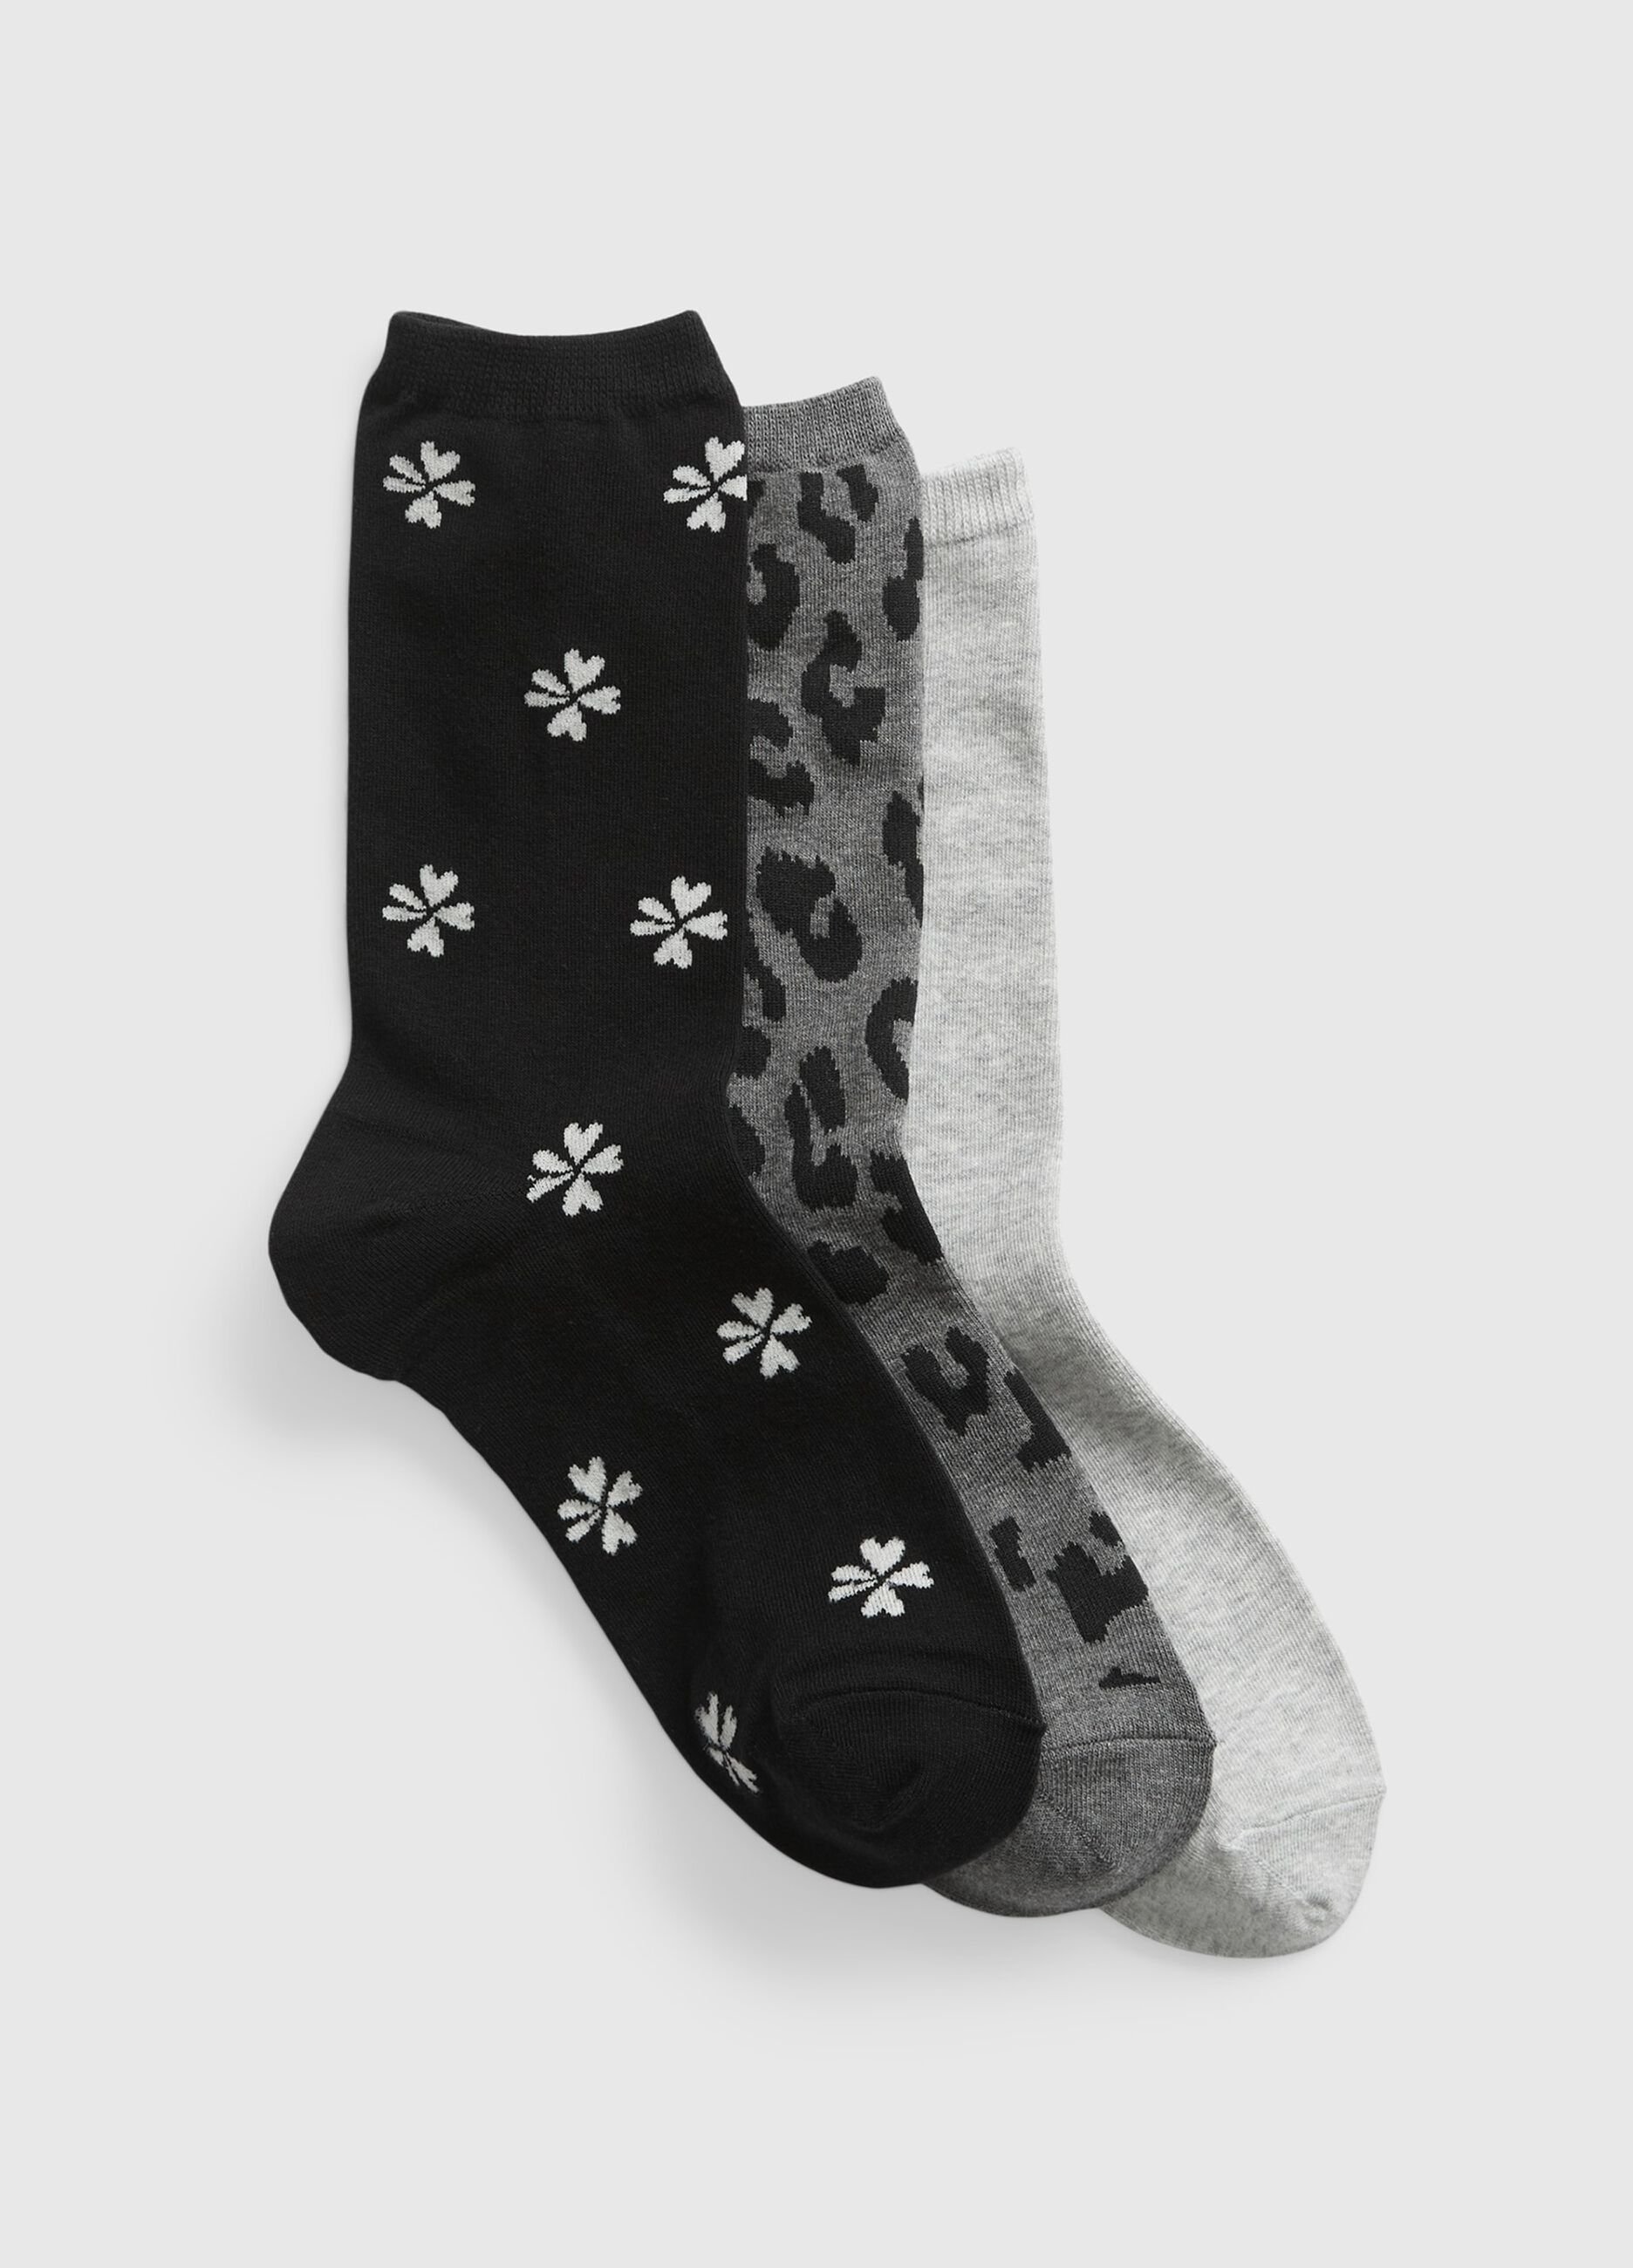 Three-pair pack socks with floral pattern